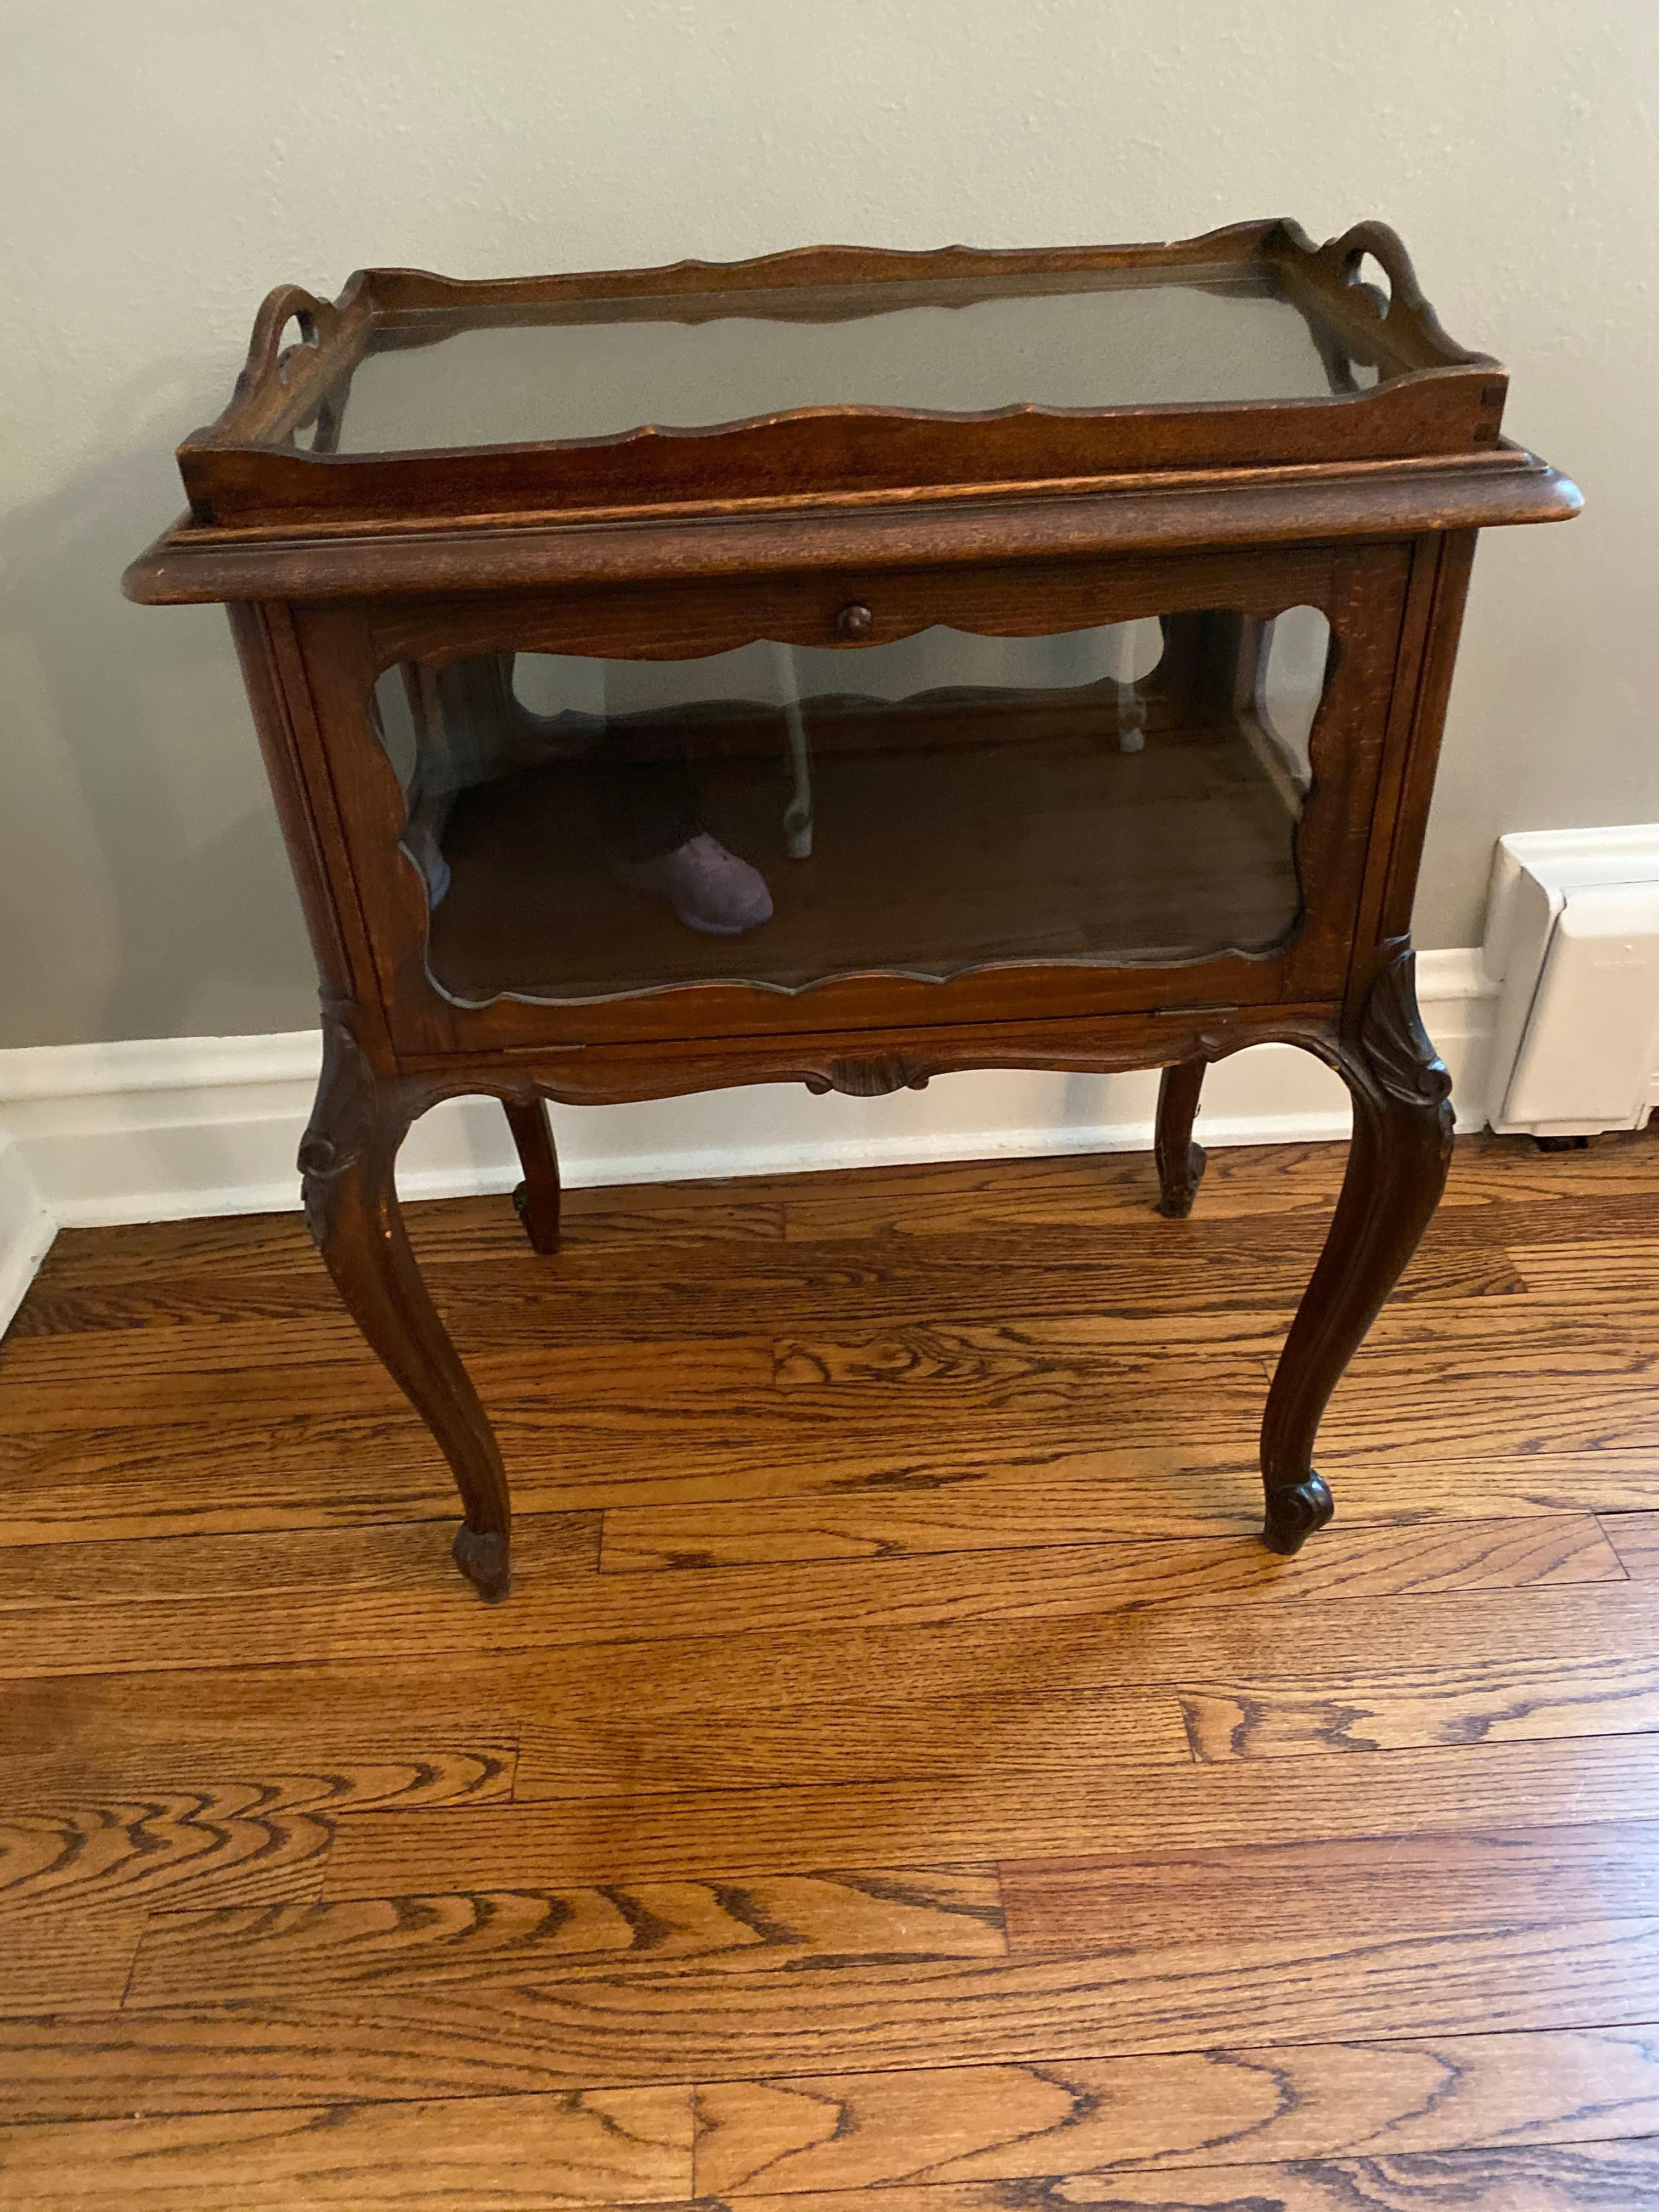 Solid mahogany... beveled glass panes, hinged door gives access to interior storage cabinet and removable glass serving tray. 
Wonderful carvings, delicately curved legs...

A wonderful piece we seldom see. It is extremely useful. The top glass